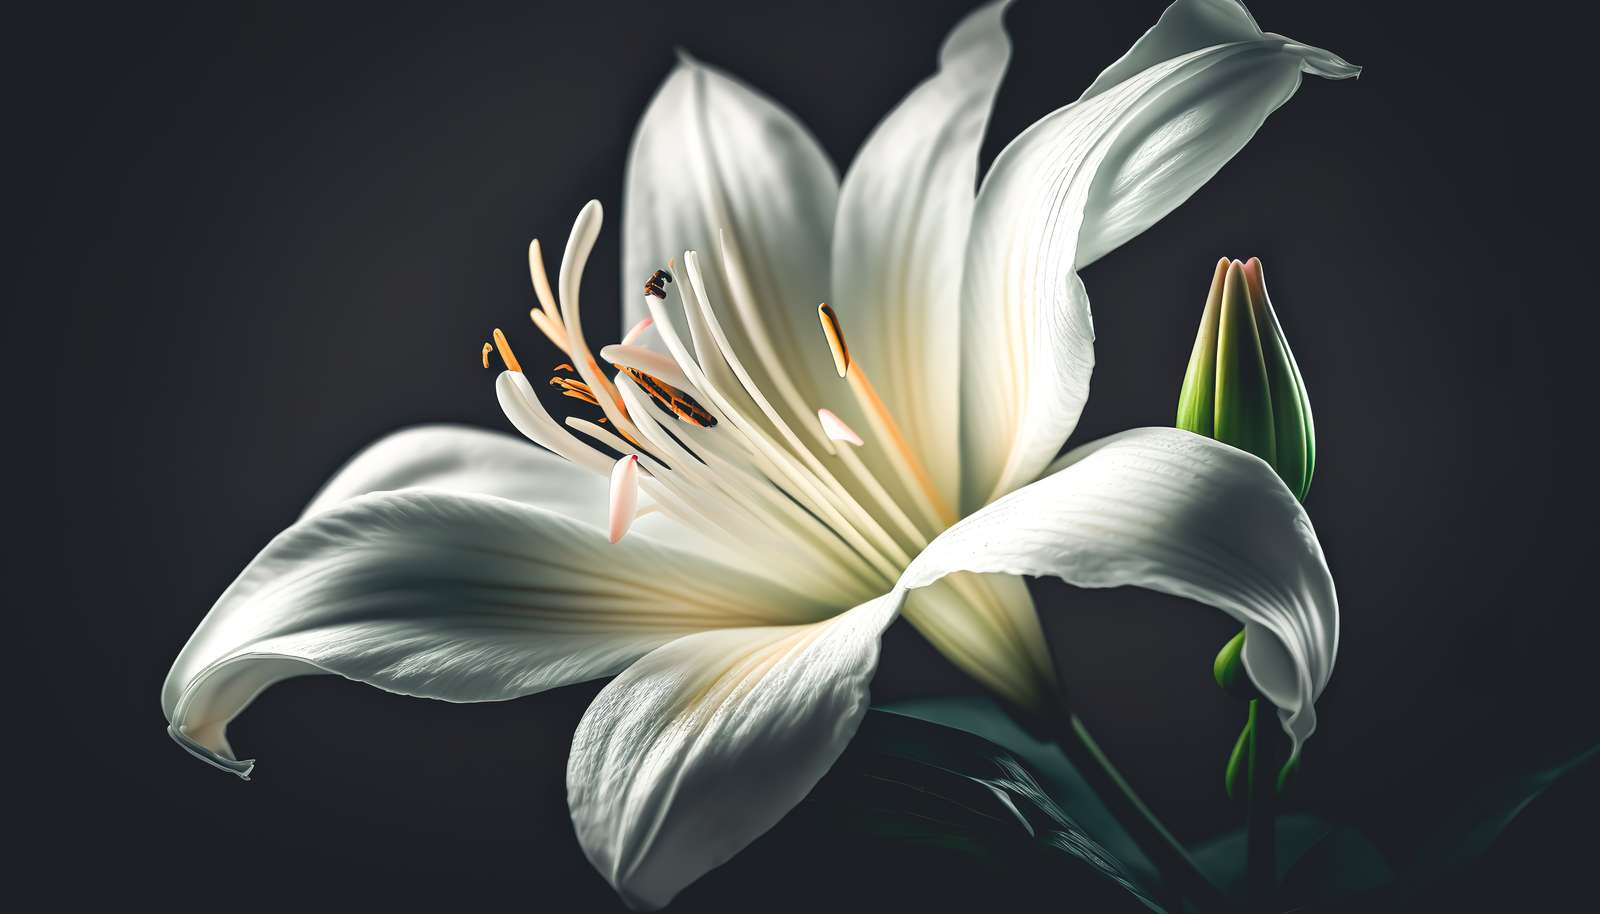 Lily flower online puzzle